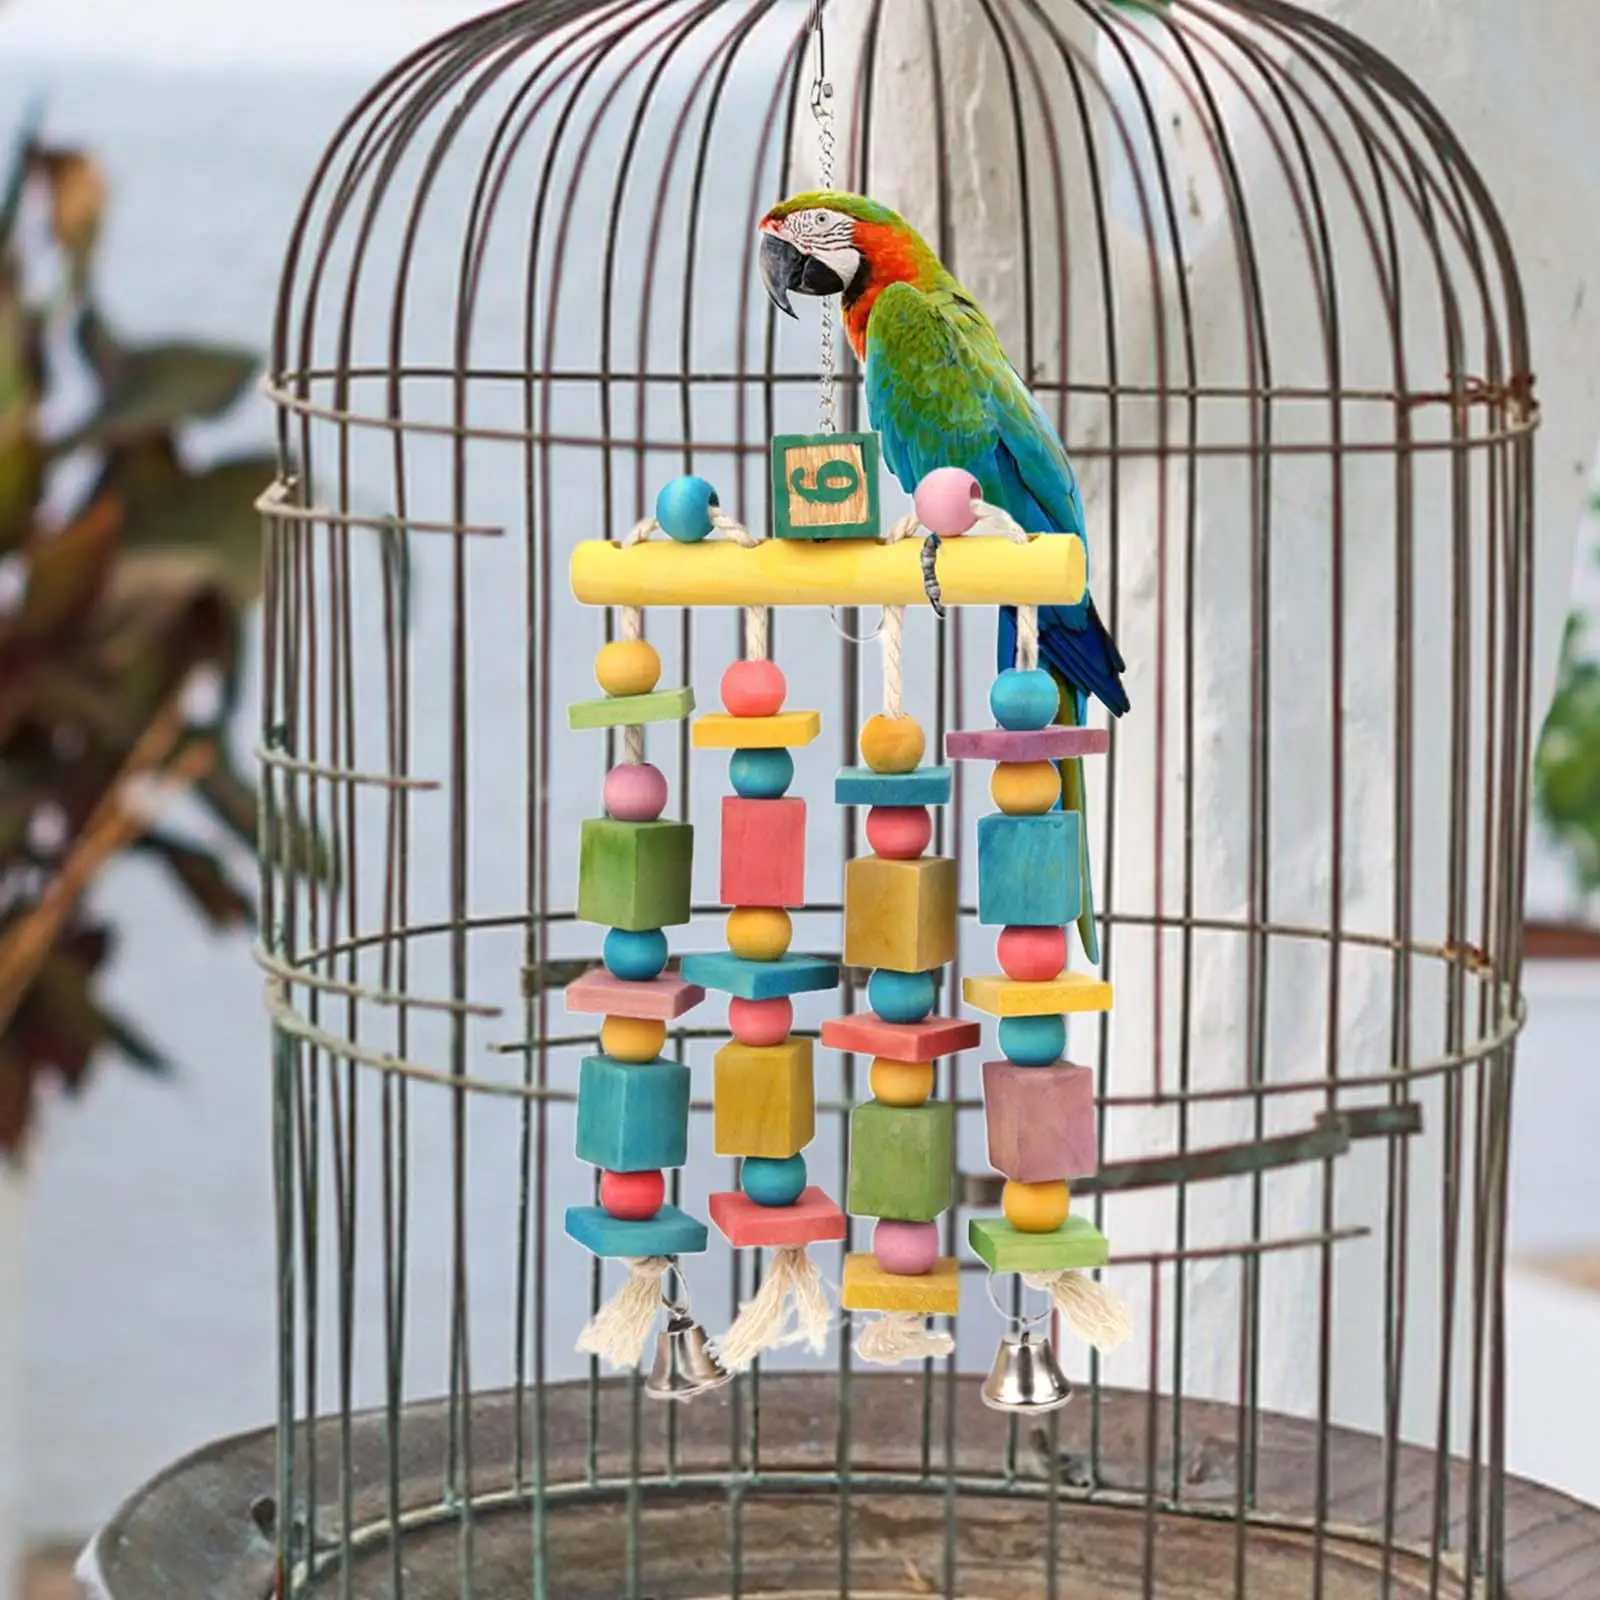 Wooden Lovebird Hamster Chinchilla Rabbit Multicolored Parakeets Wooden Blocks Finches Bird Chewing Toy Parrot Cage Bite Toys